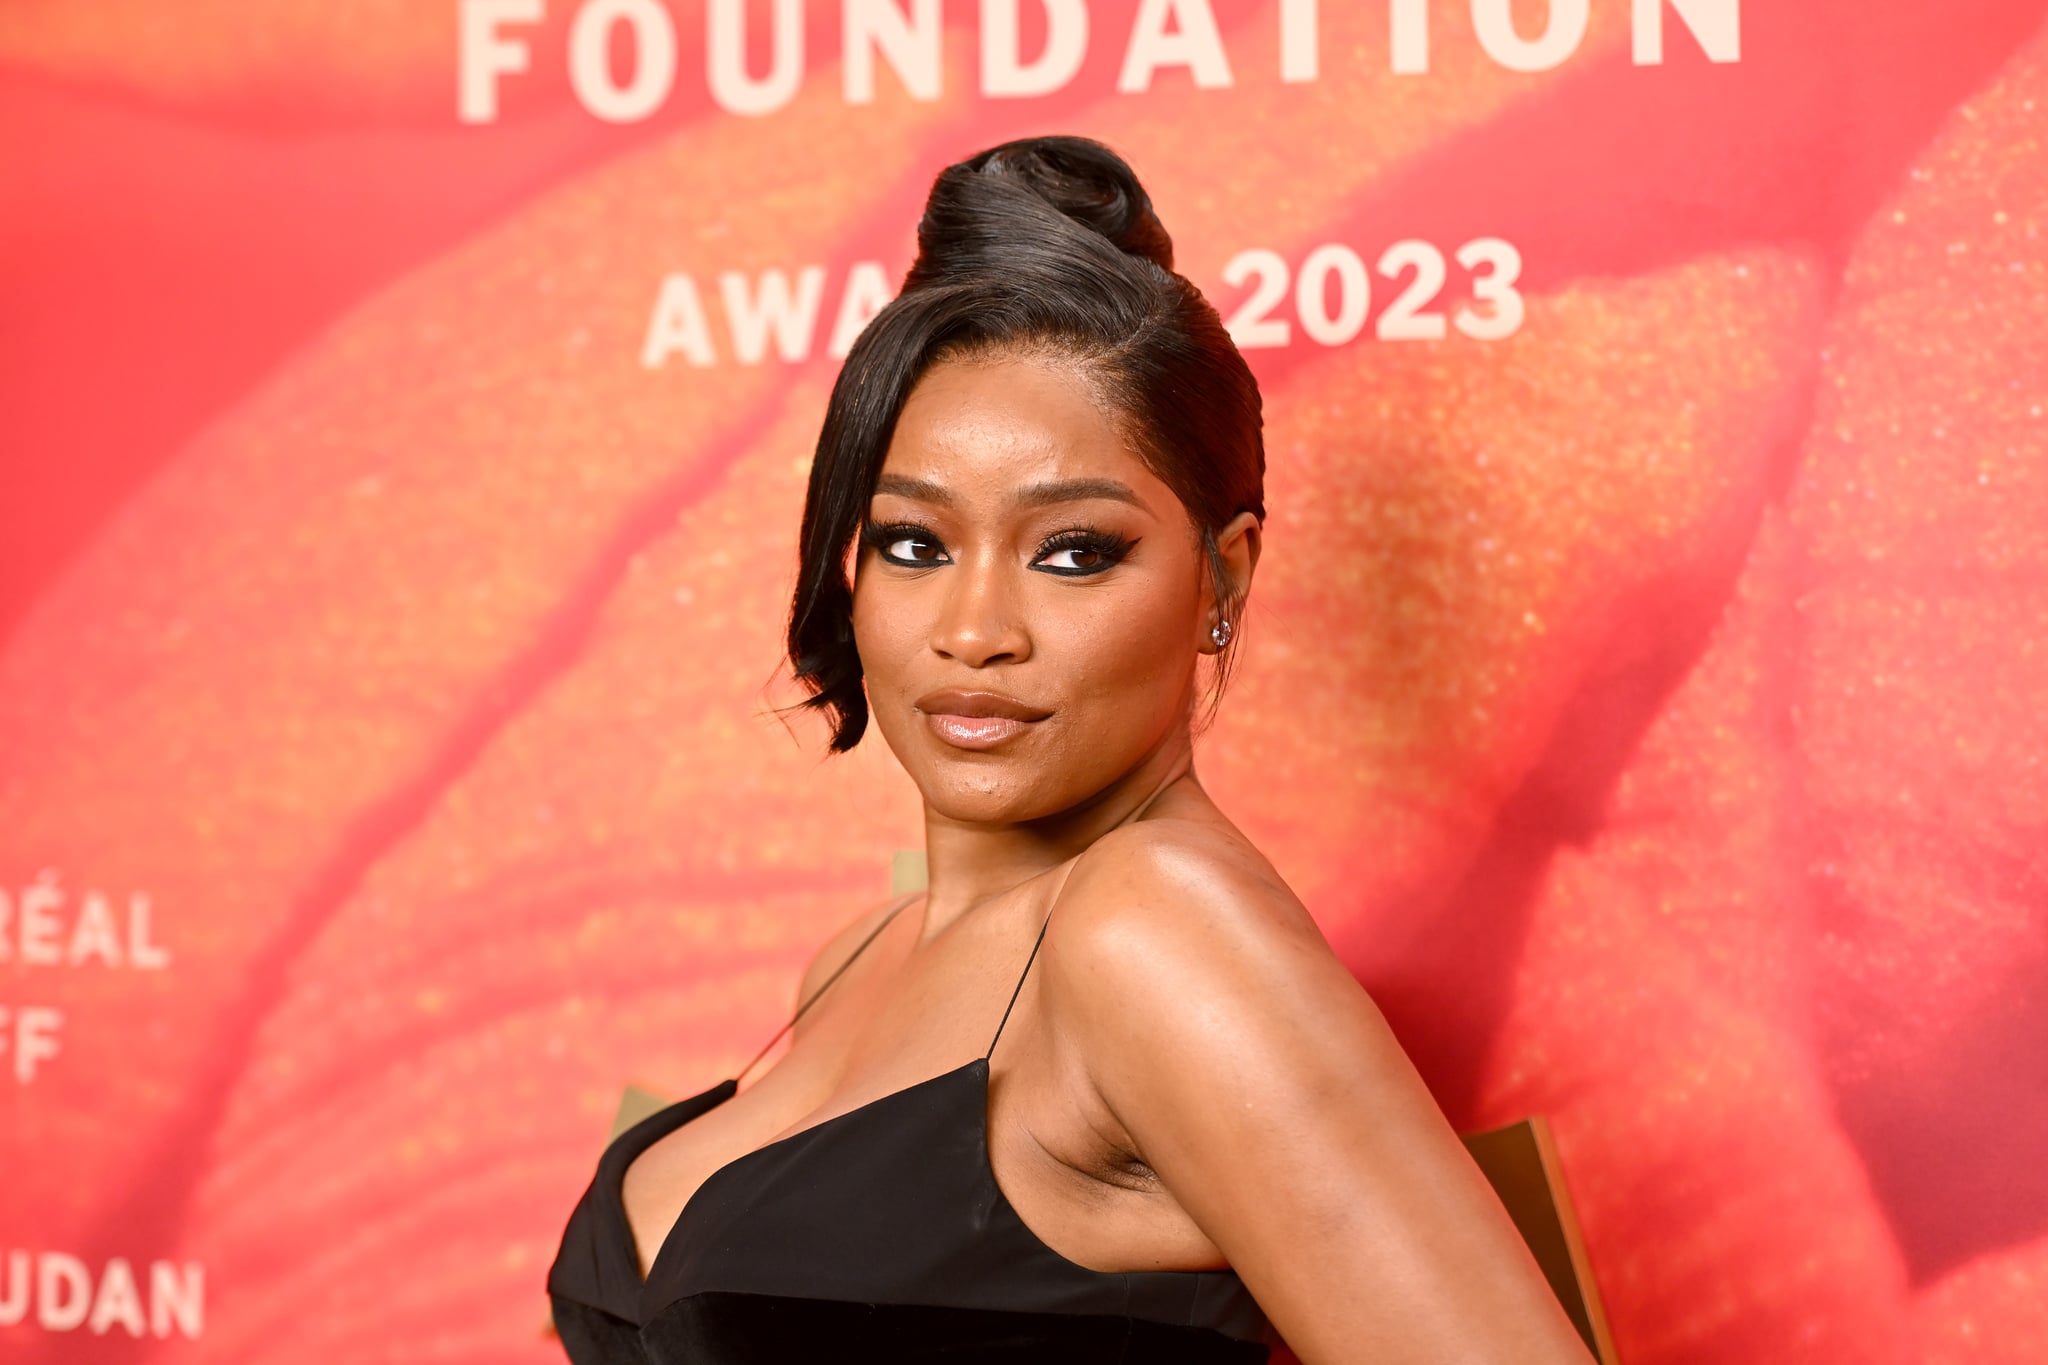 NEW YORK, NEW YORK - JUNE 15: Keke Palmer attends the 2023 Fragrance Foundation Awards at David H. Koch Theatre at Lincoln Centre on June 15, 2023 in New York City. (Photo by Noam Galai/Getty Images)